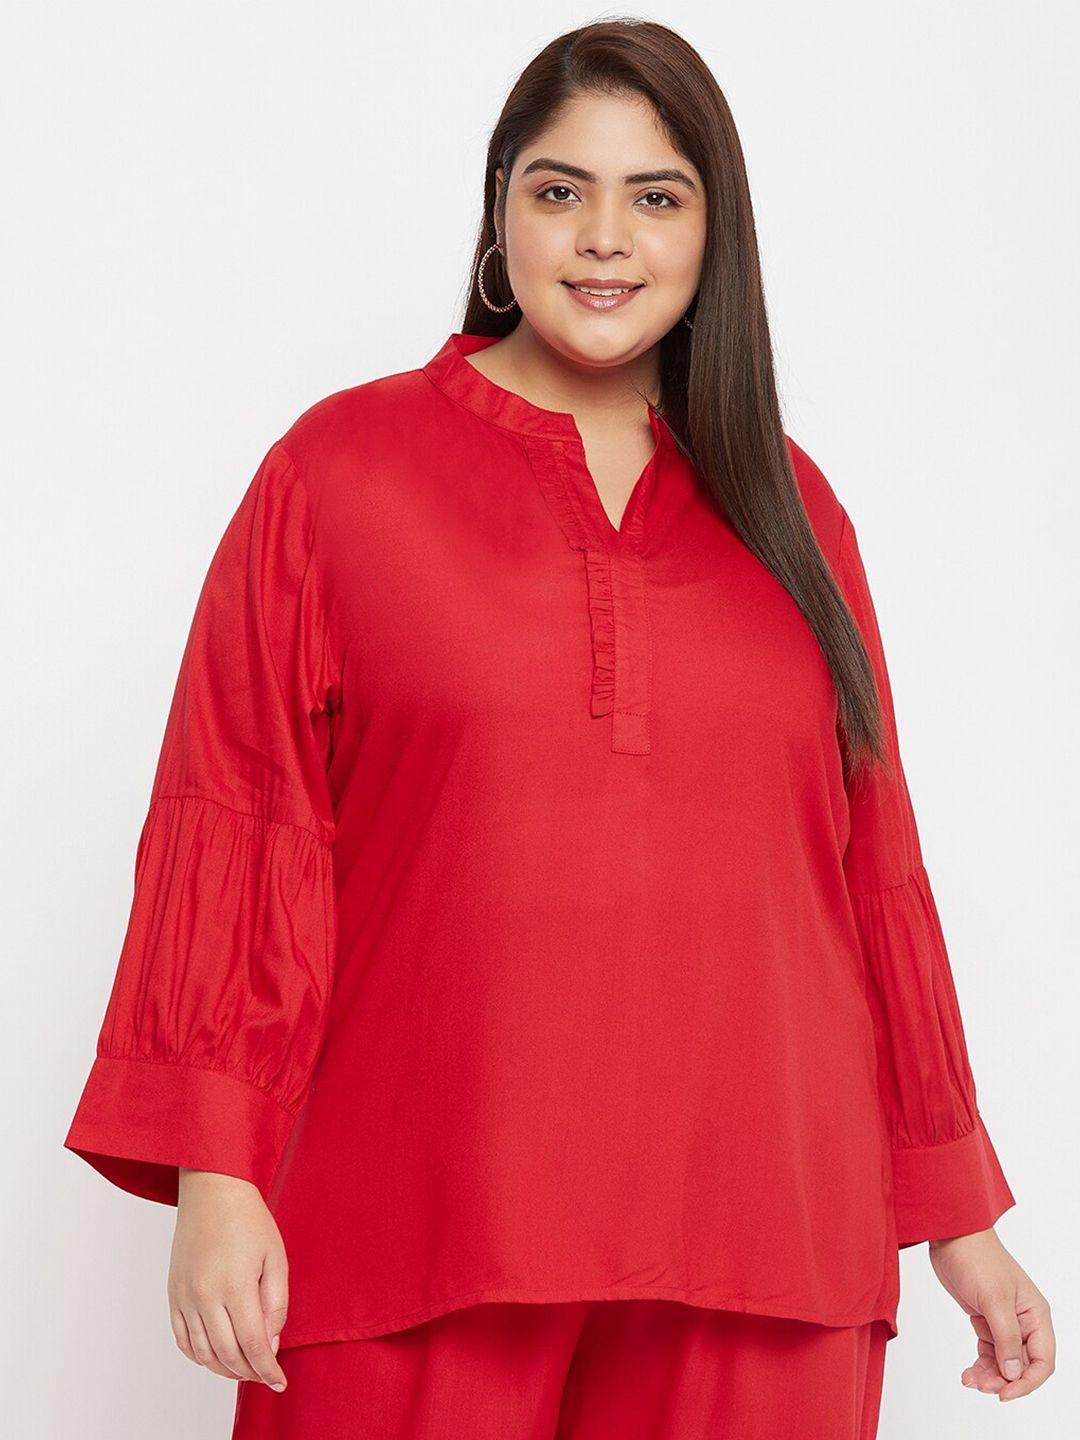 vinaan plus size band collar cuffed sleeves shirt style top